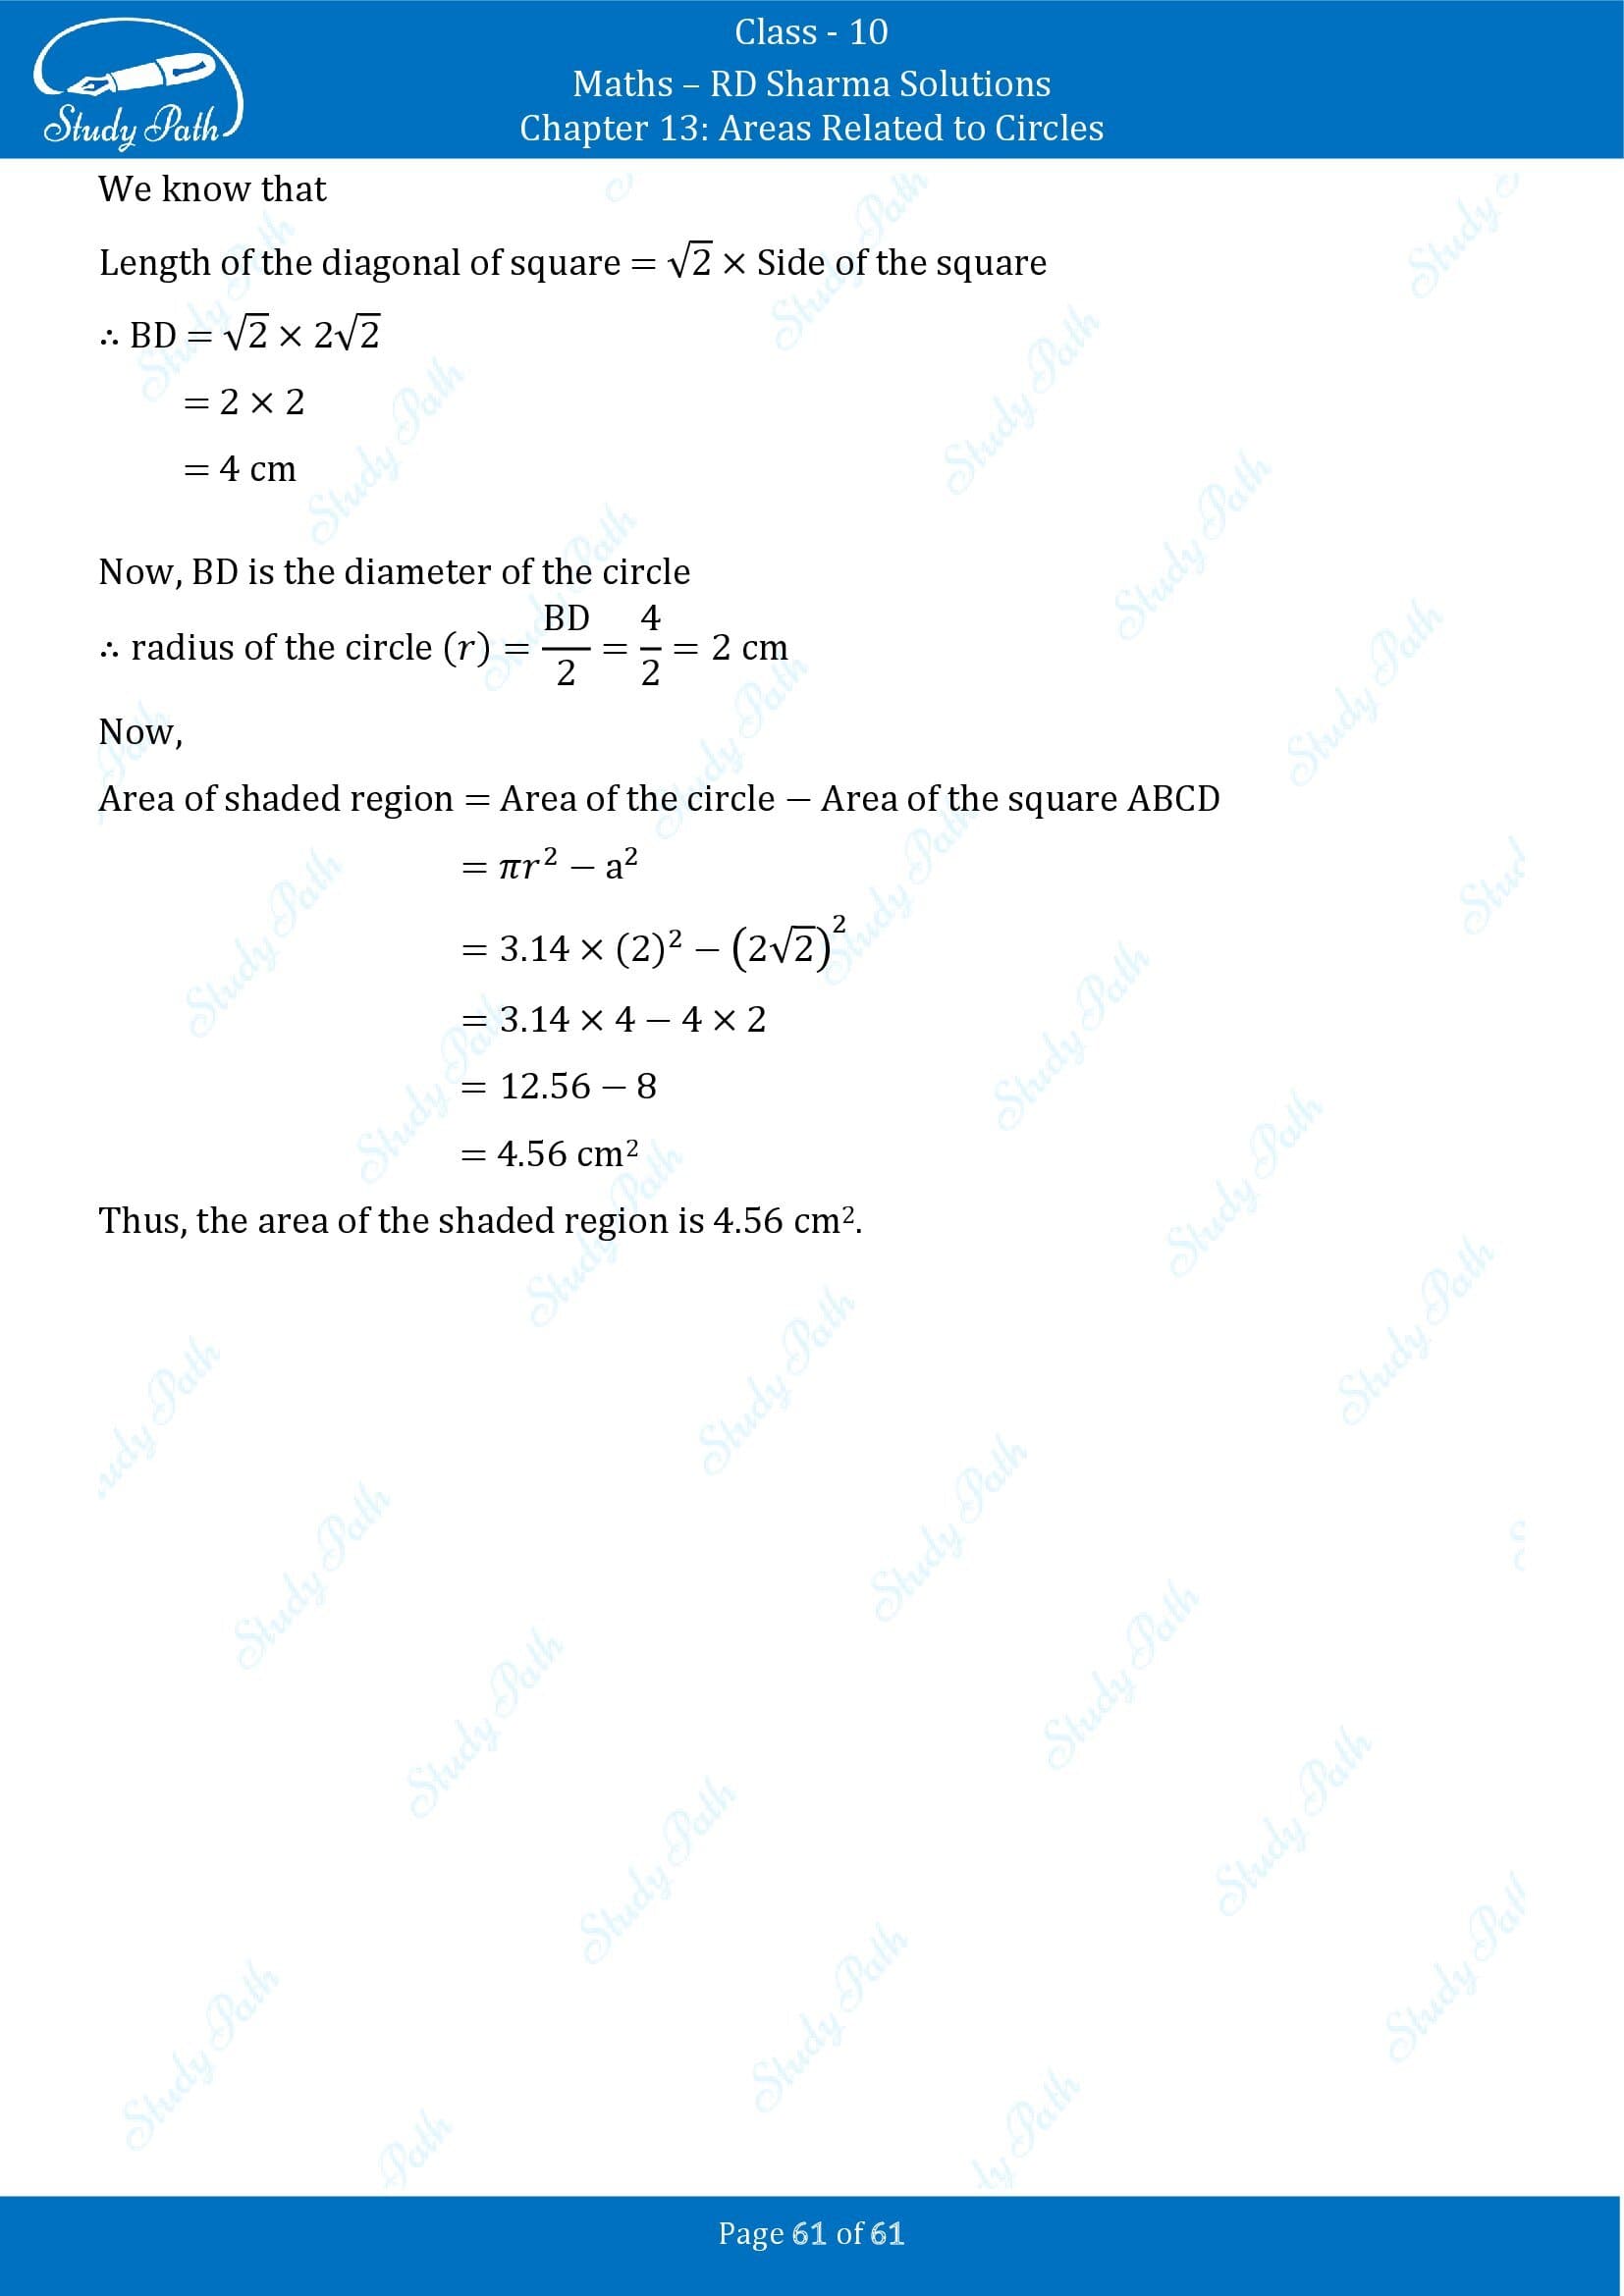 RD Sharma Solutions Class 10 Chapter 13 Areas Related to Circles Exercise 13.4 00061